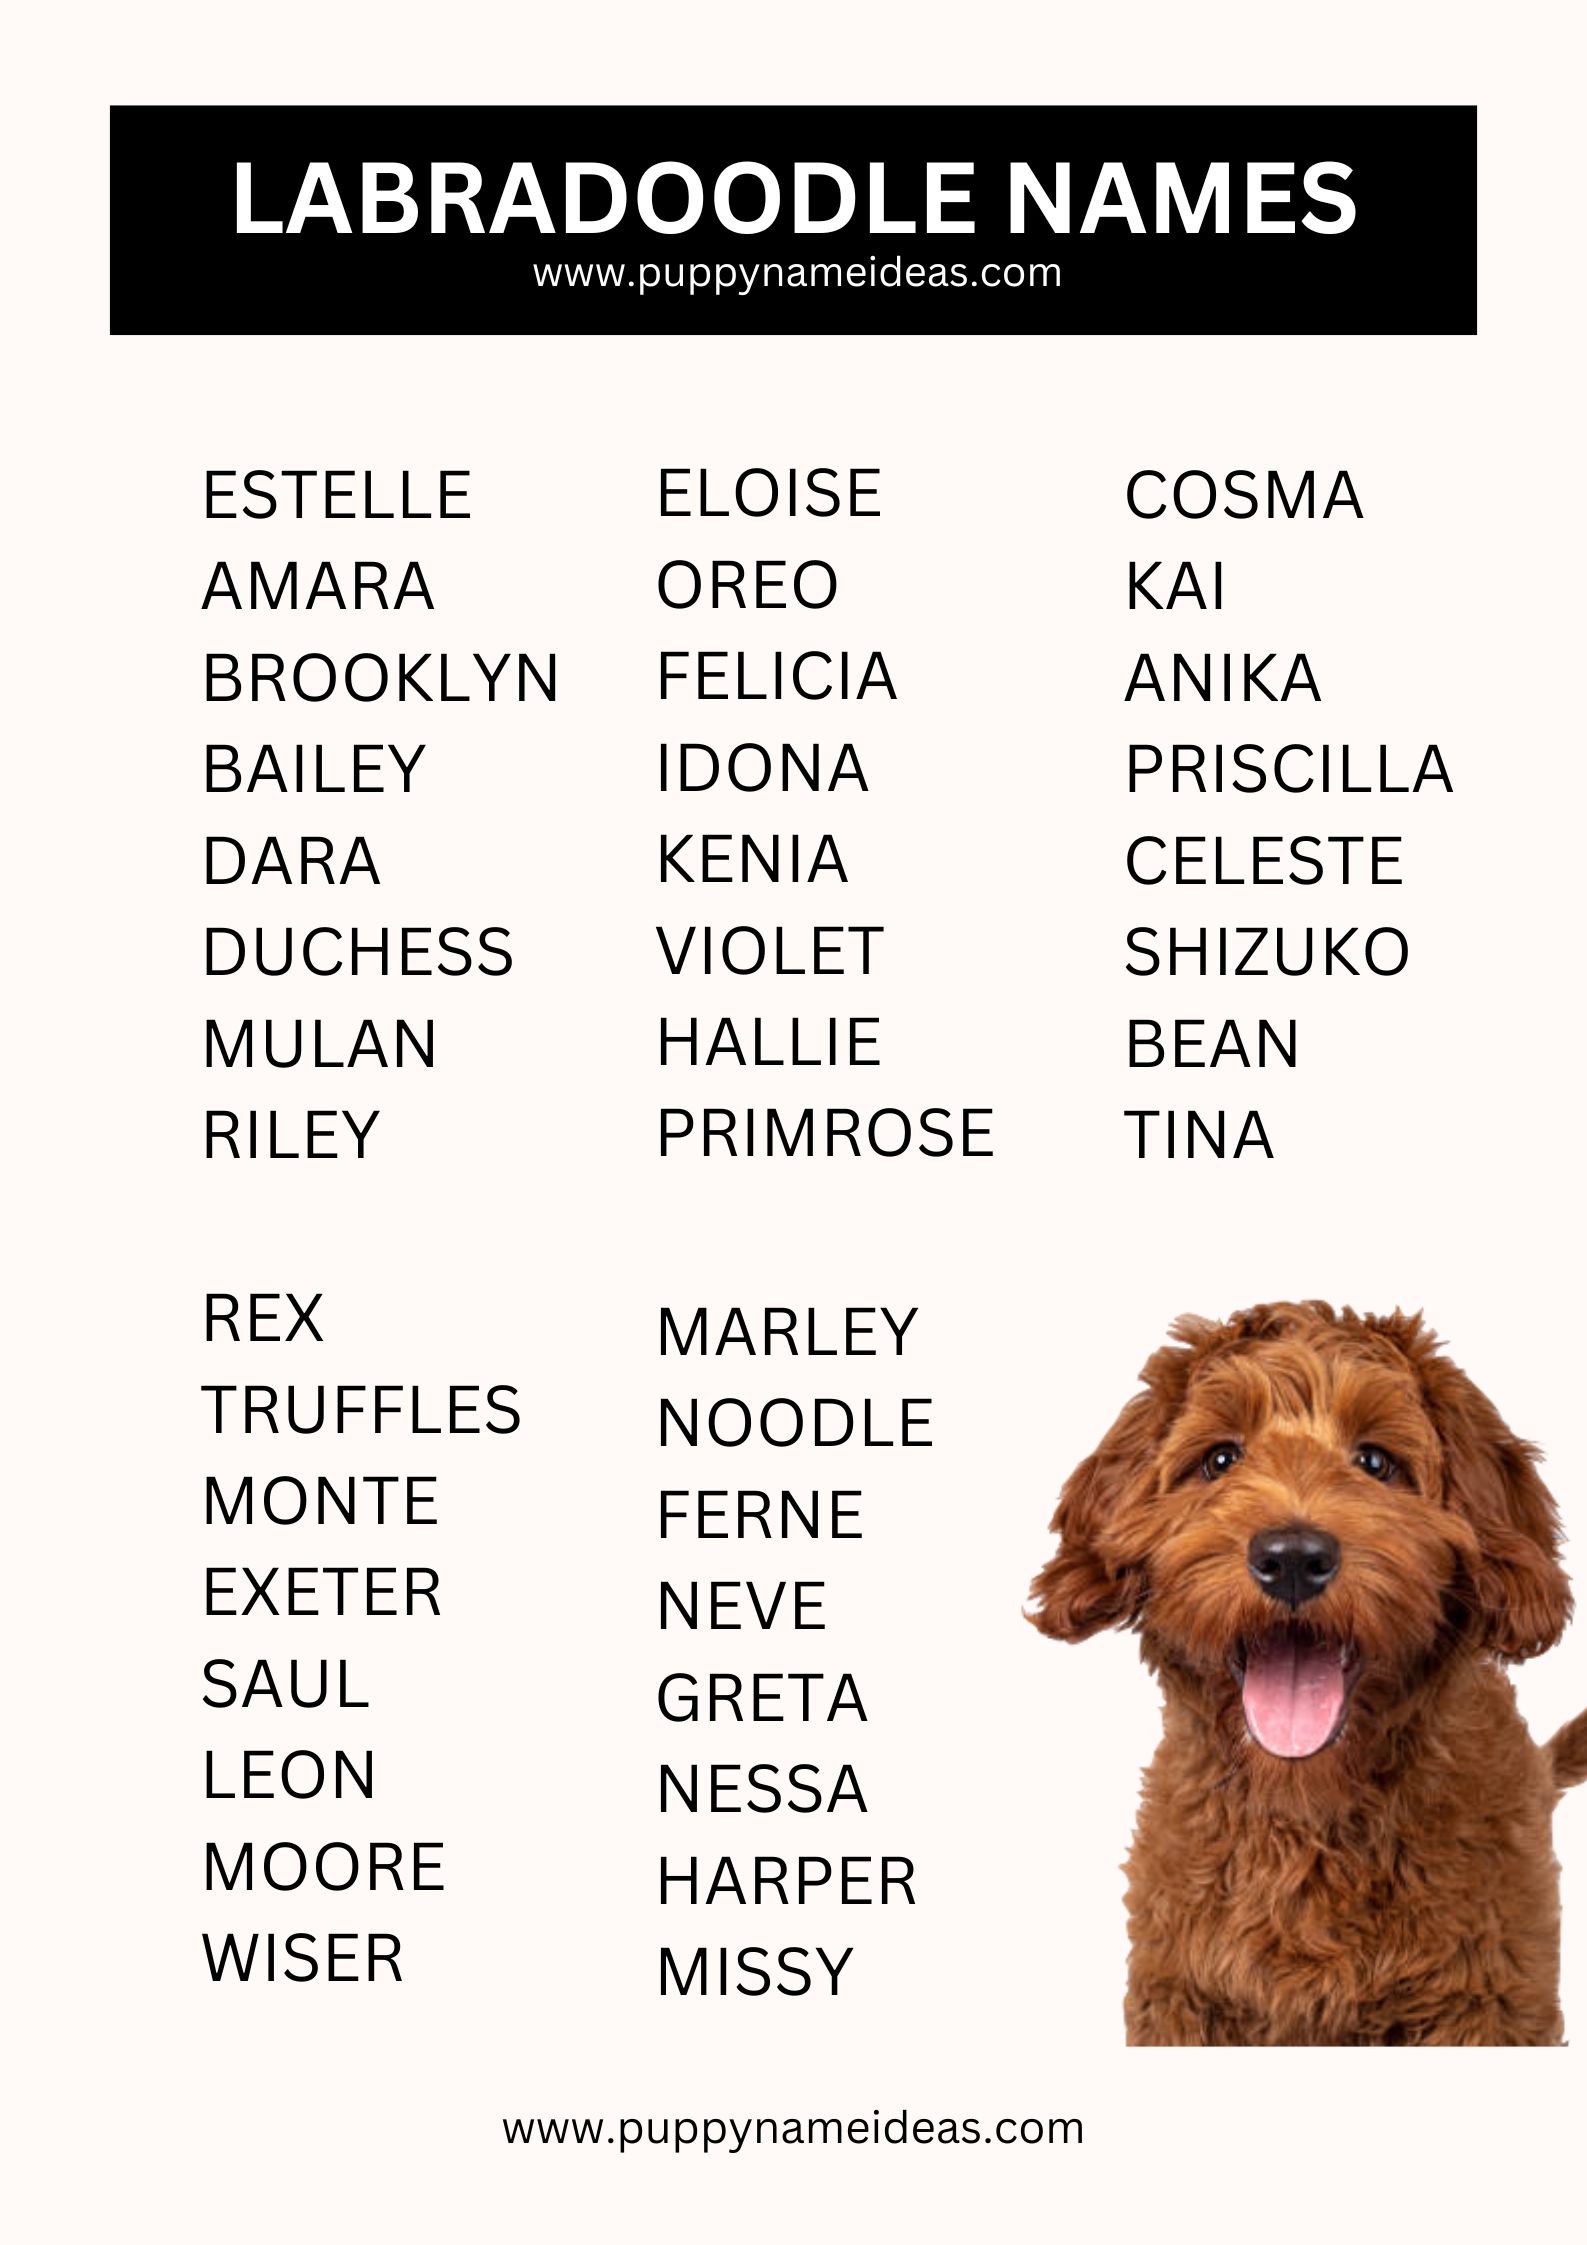 list of labradoodle names